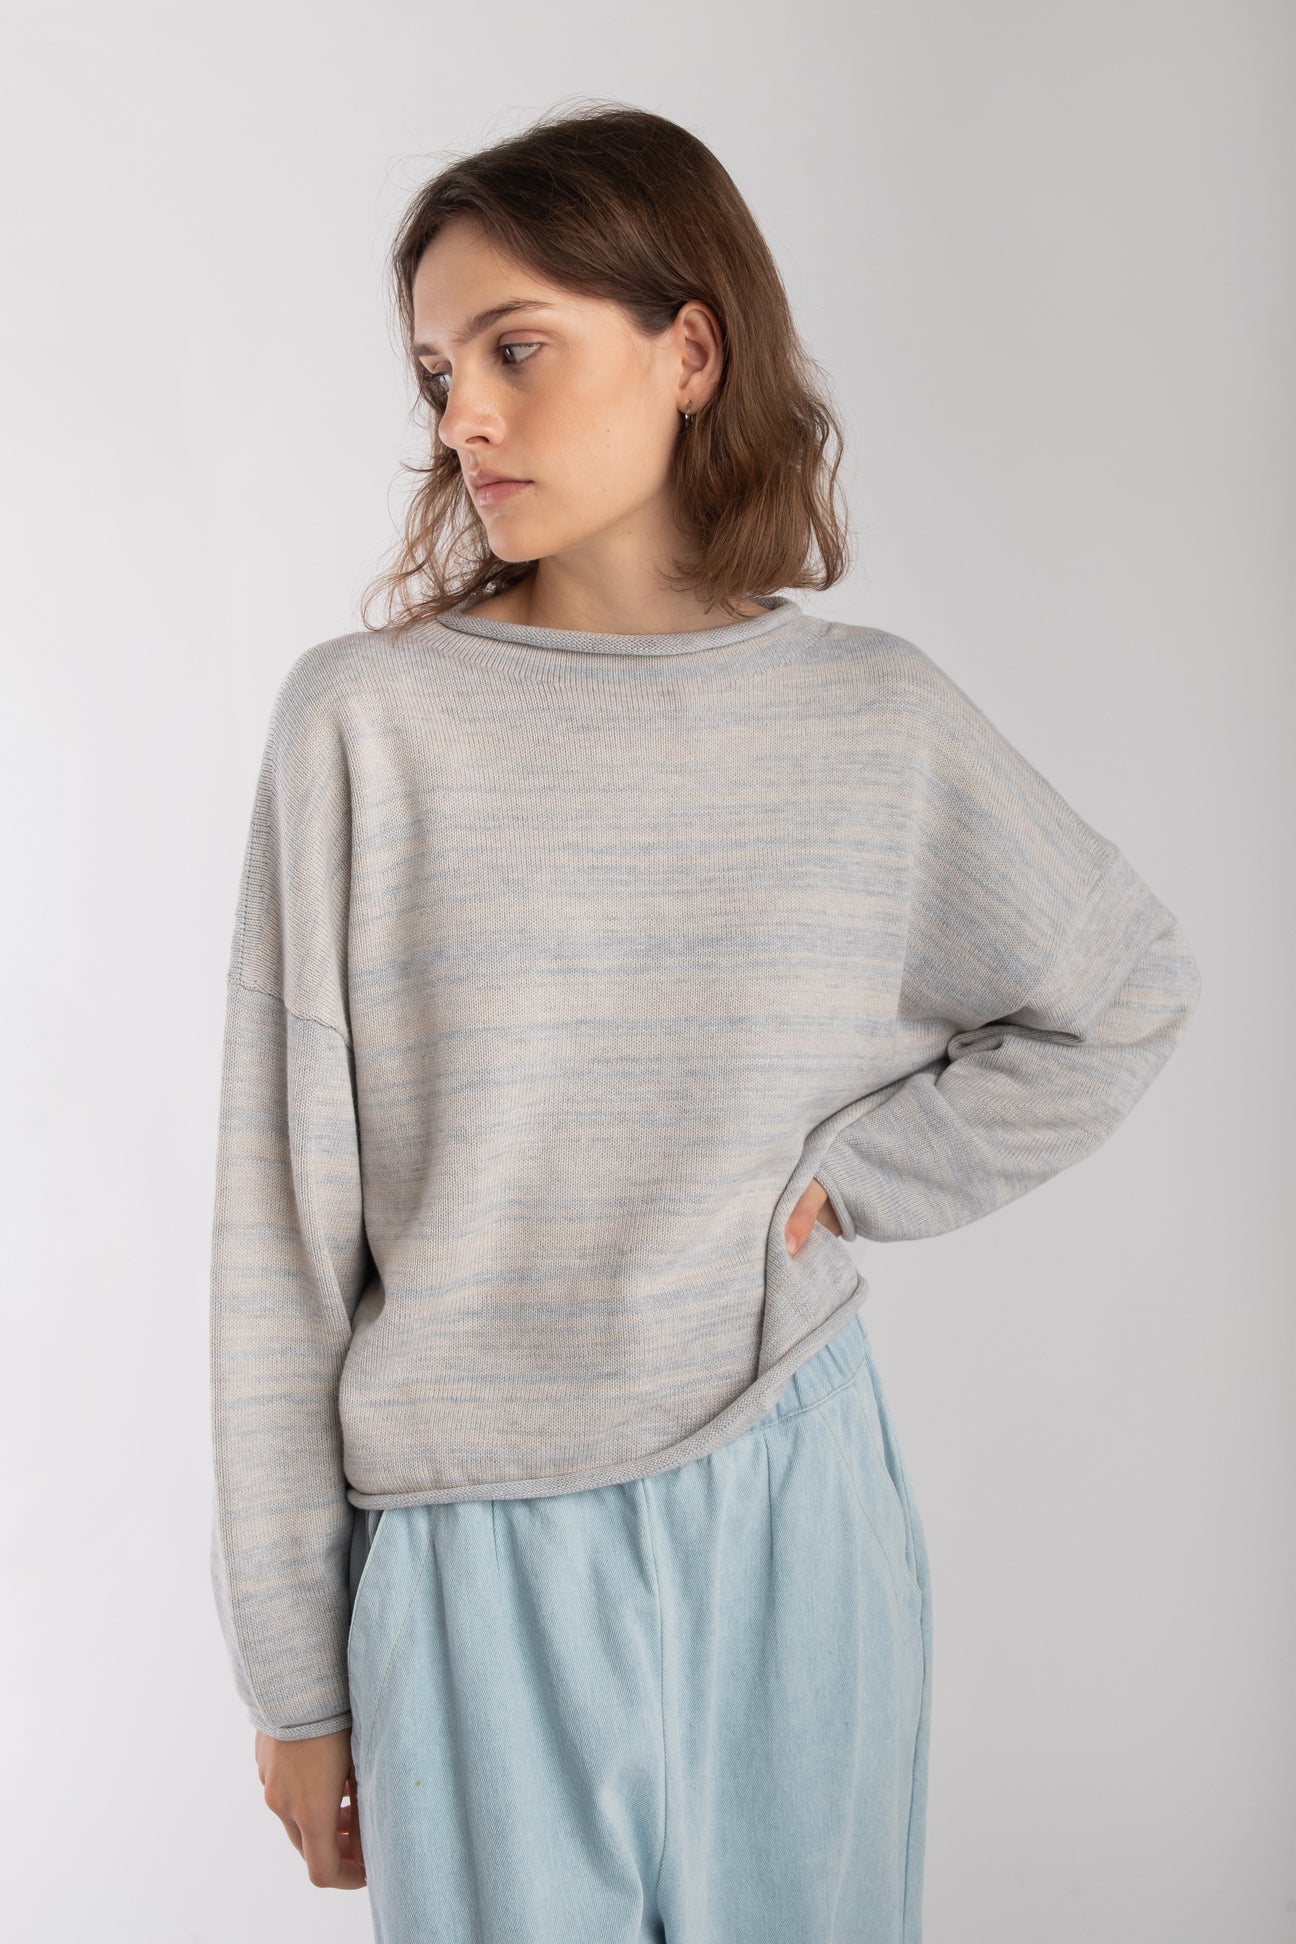 Heather Grey Rolled Sweater